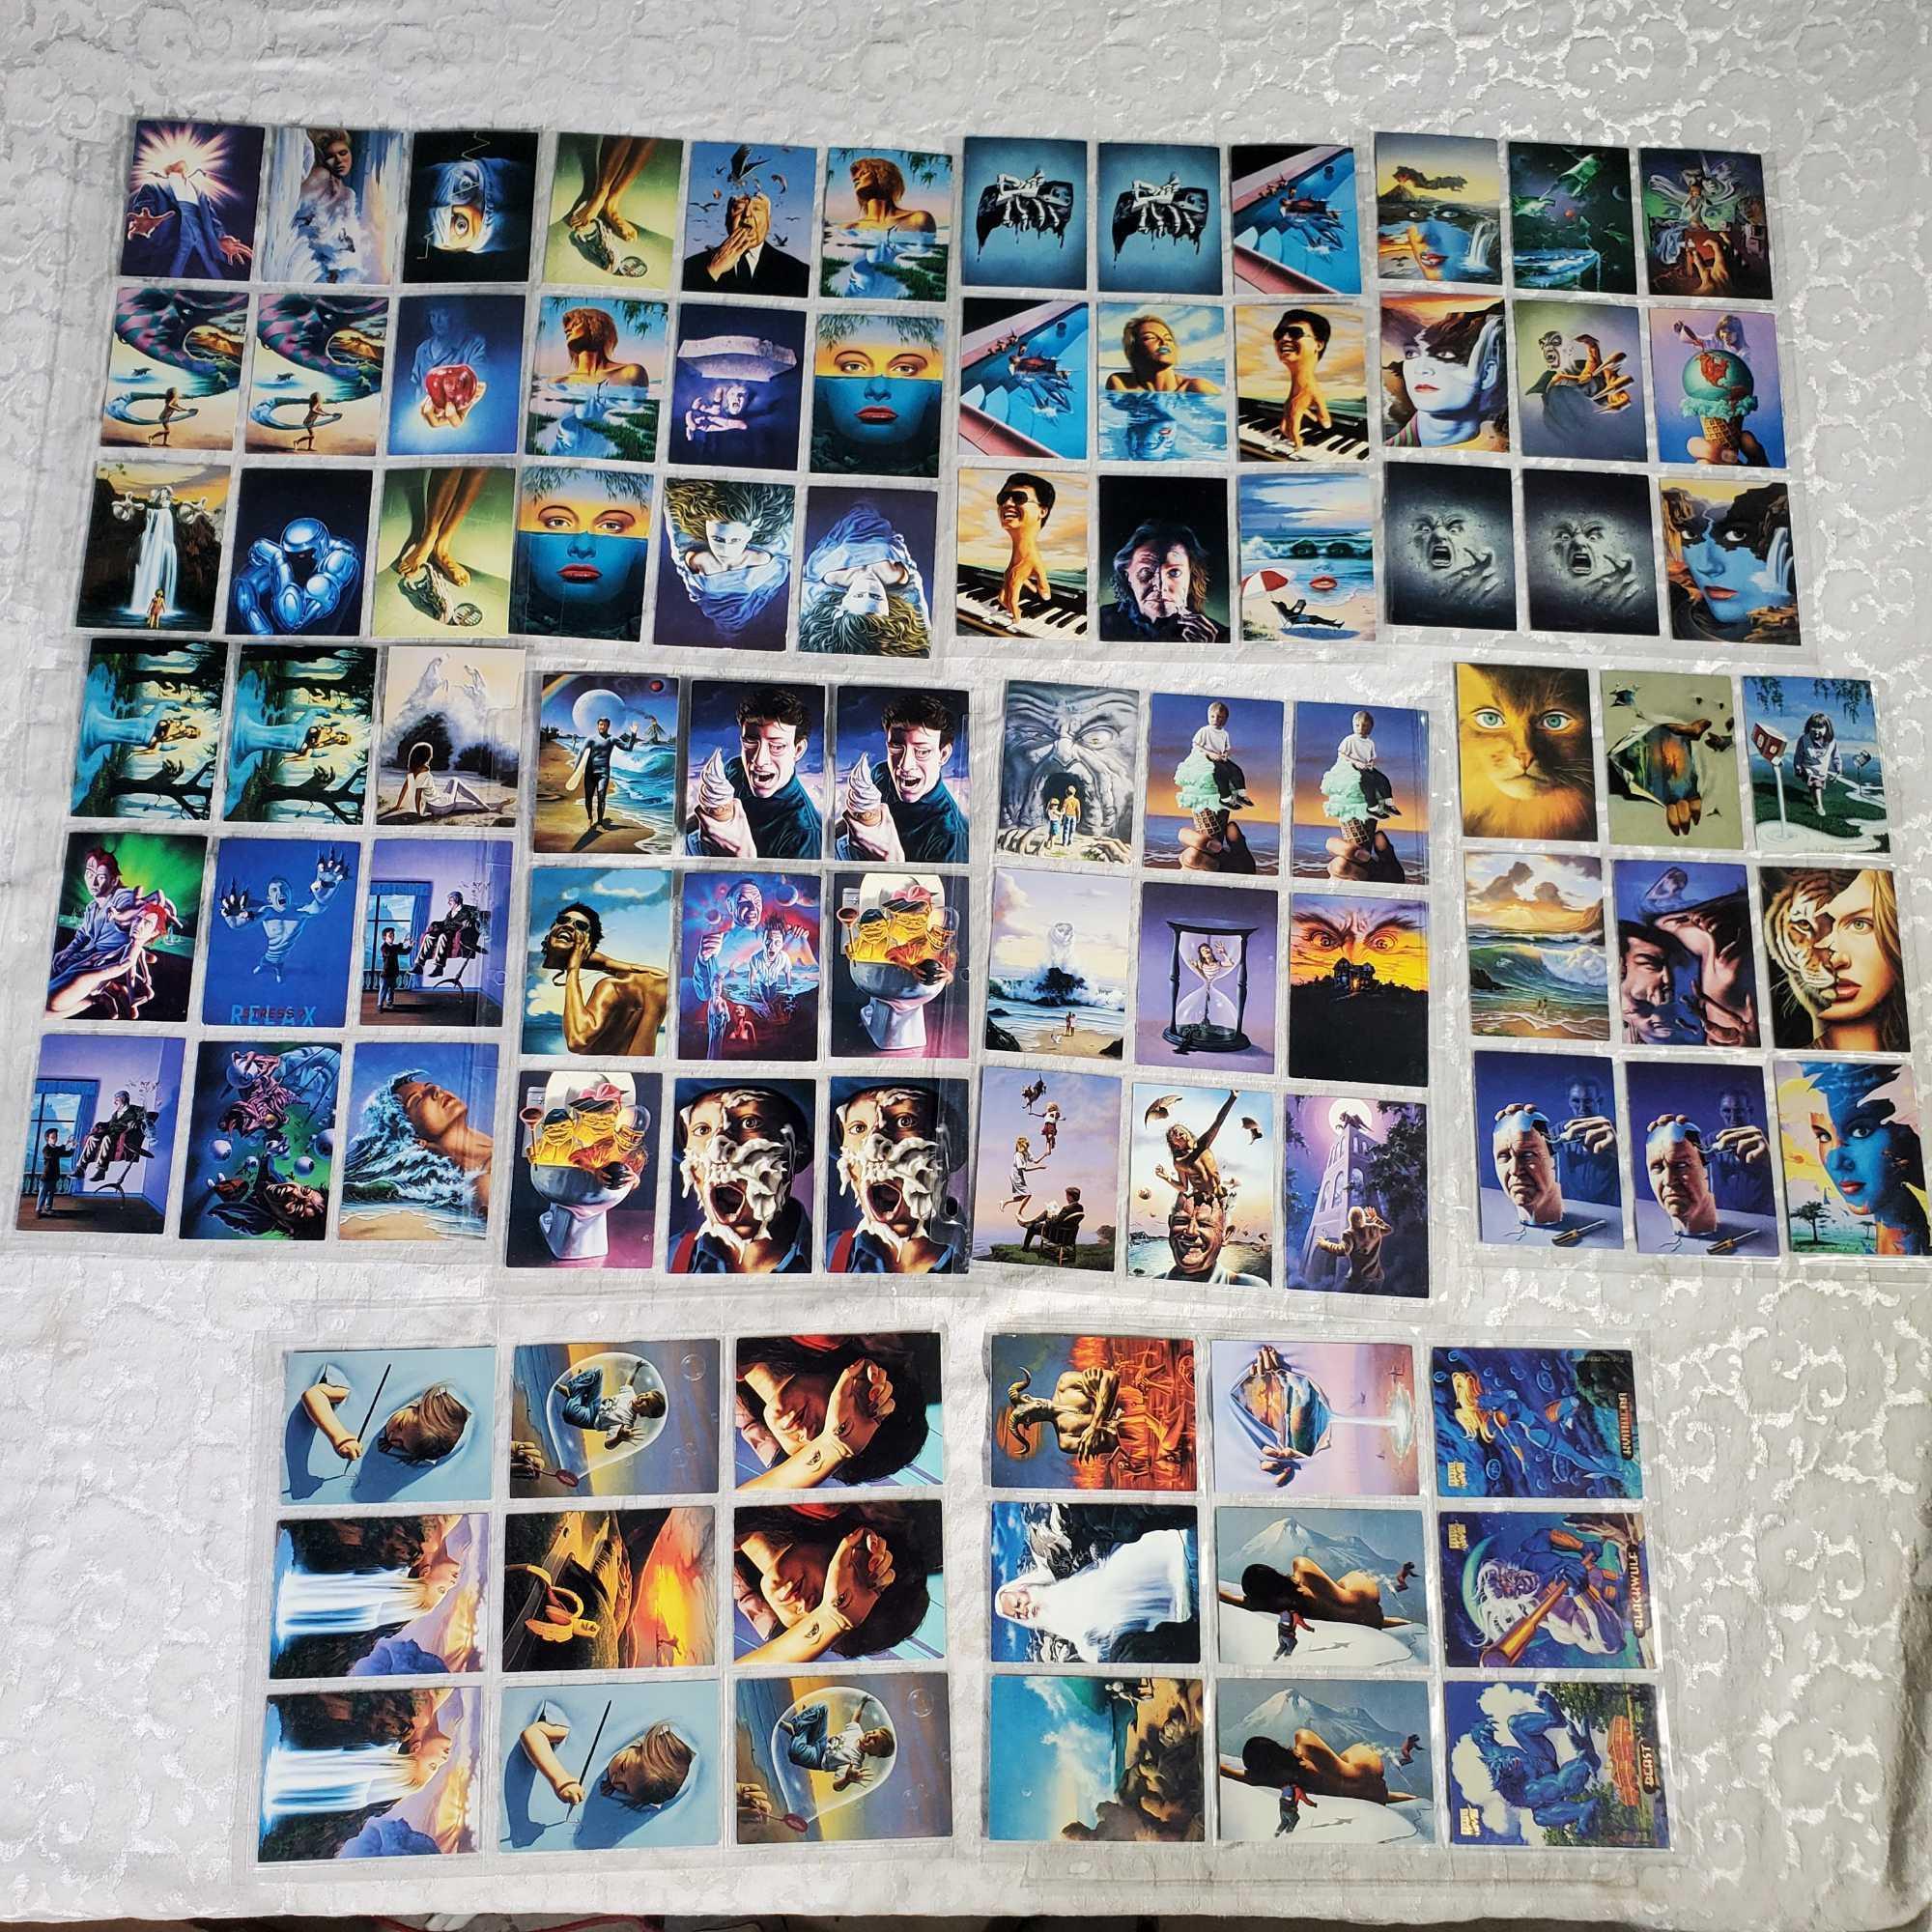 Several Albums of Mixed Collector Cards - Gremlins, Batman, Dune, Jaws and More